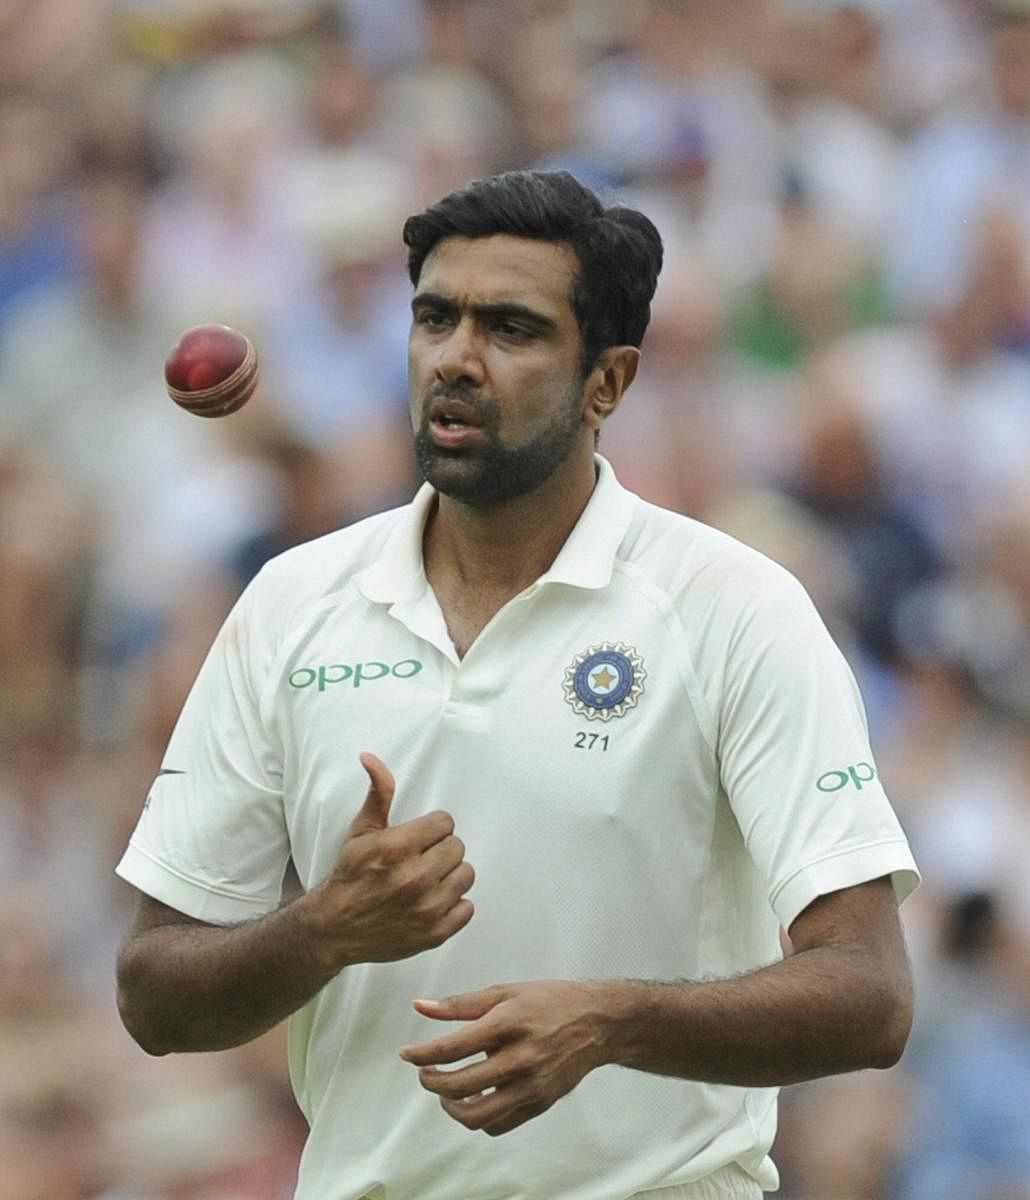 R Ashwin, who not too long ago was skipper Virat Kohli’s primary spin option, has shockingly being banished to the benches despite the Tamil Nadu cricketer being in good form in the build-up to the West Indies series. AFP